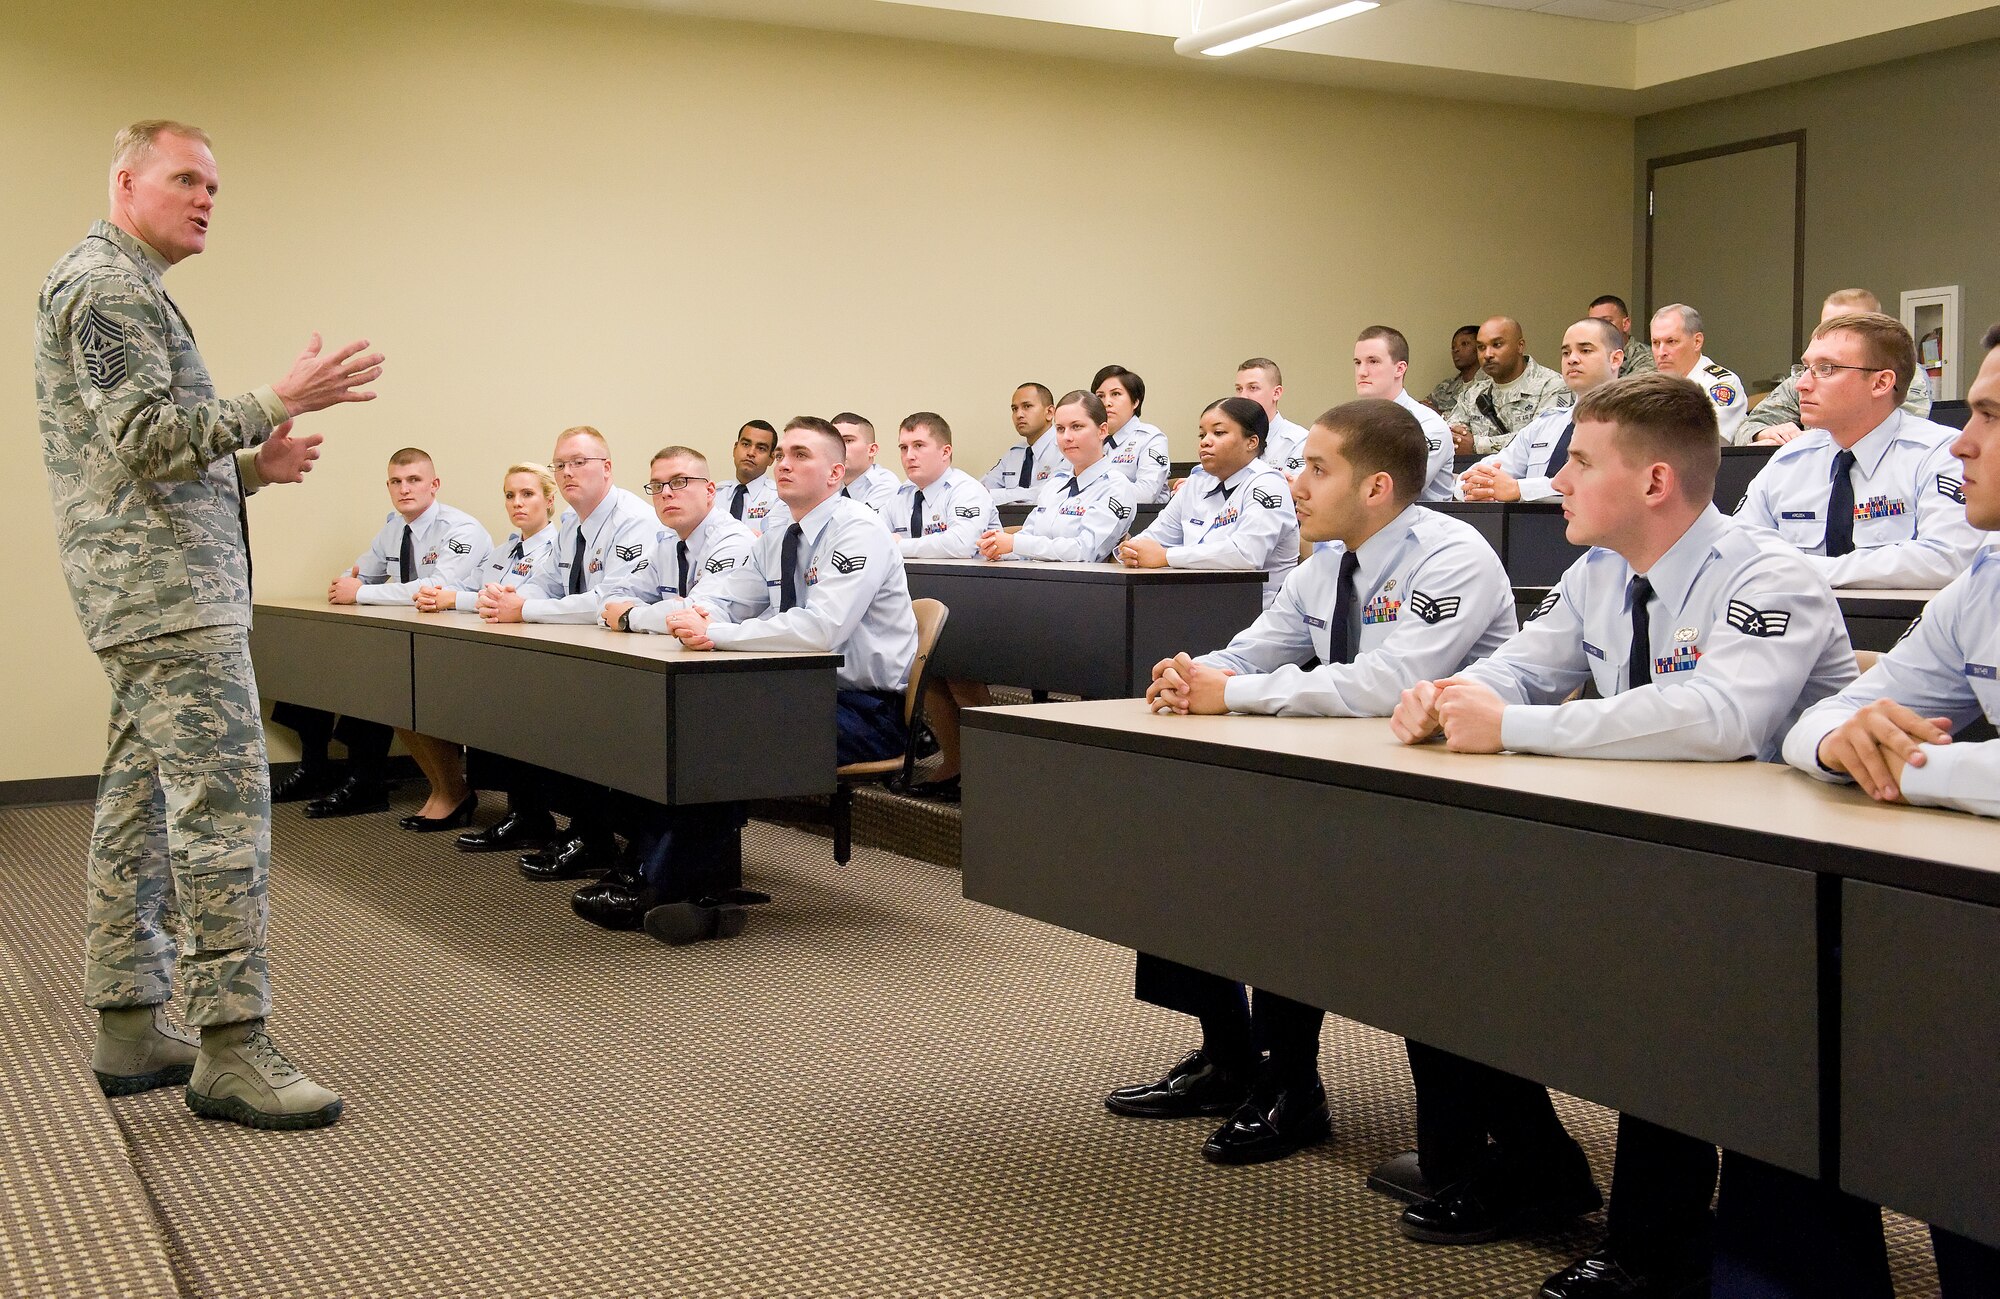 Chief Master Sgt. of the Air Force James Cody speaks to students of Class 15-B on their first day of training Nov. 18, 2014, at the Staff Sgt. Julio Alonso Airman Leadership School on Dover Air Force Base, Del. Cody spoke to the 28 students about humility, leadership, promotion and what will be expected from them upon graduation as first-line supervisors. (U.S. Air Force photo/Roland Balik)